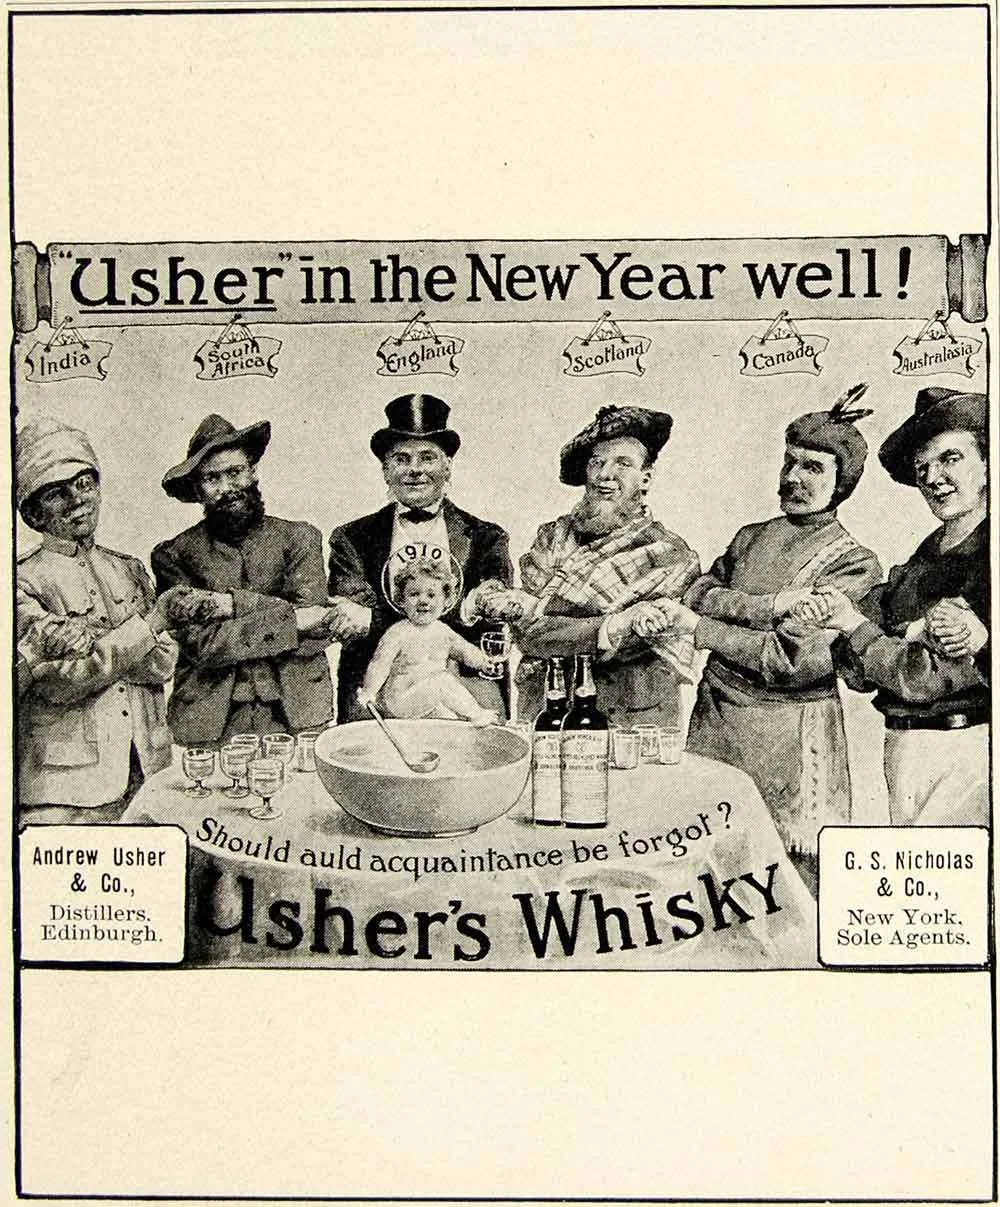 sher's Whisky, 1910